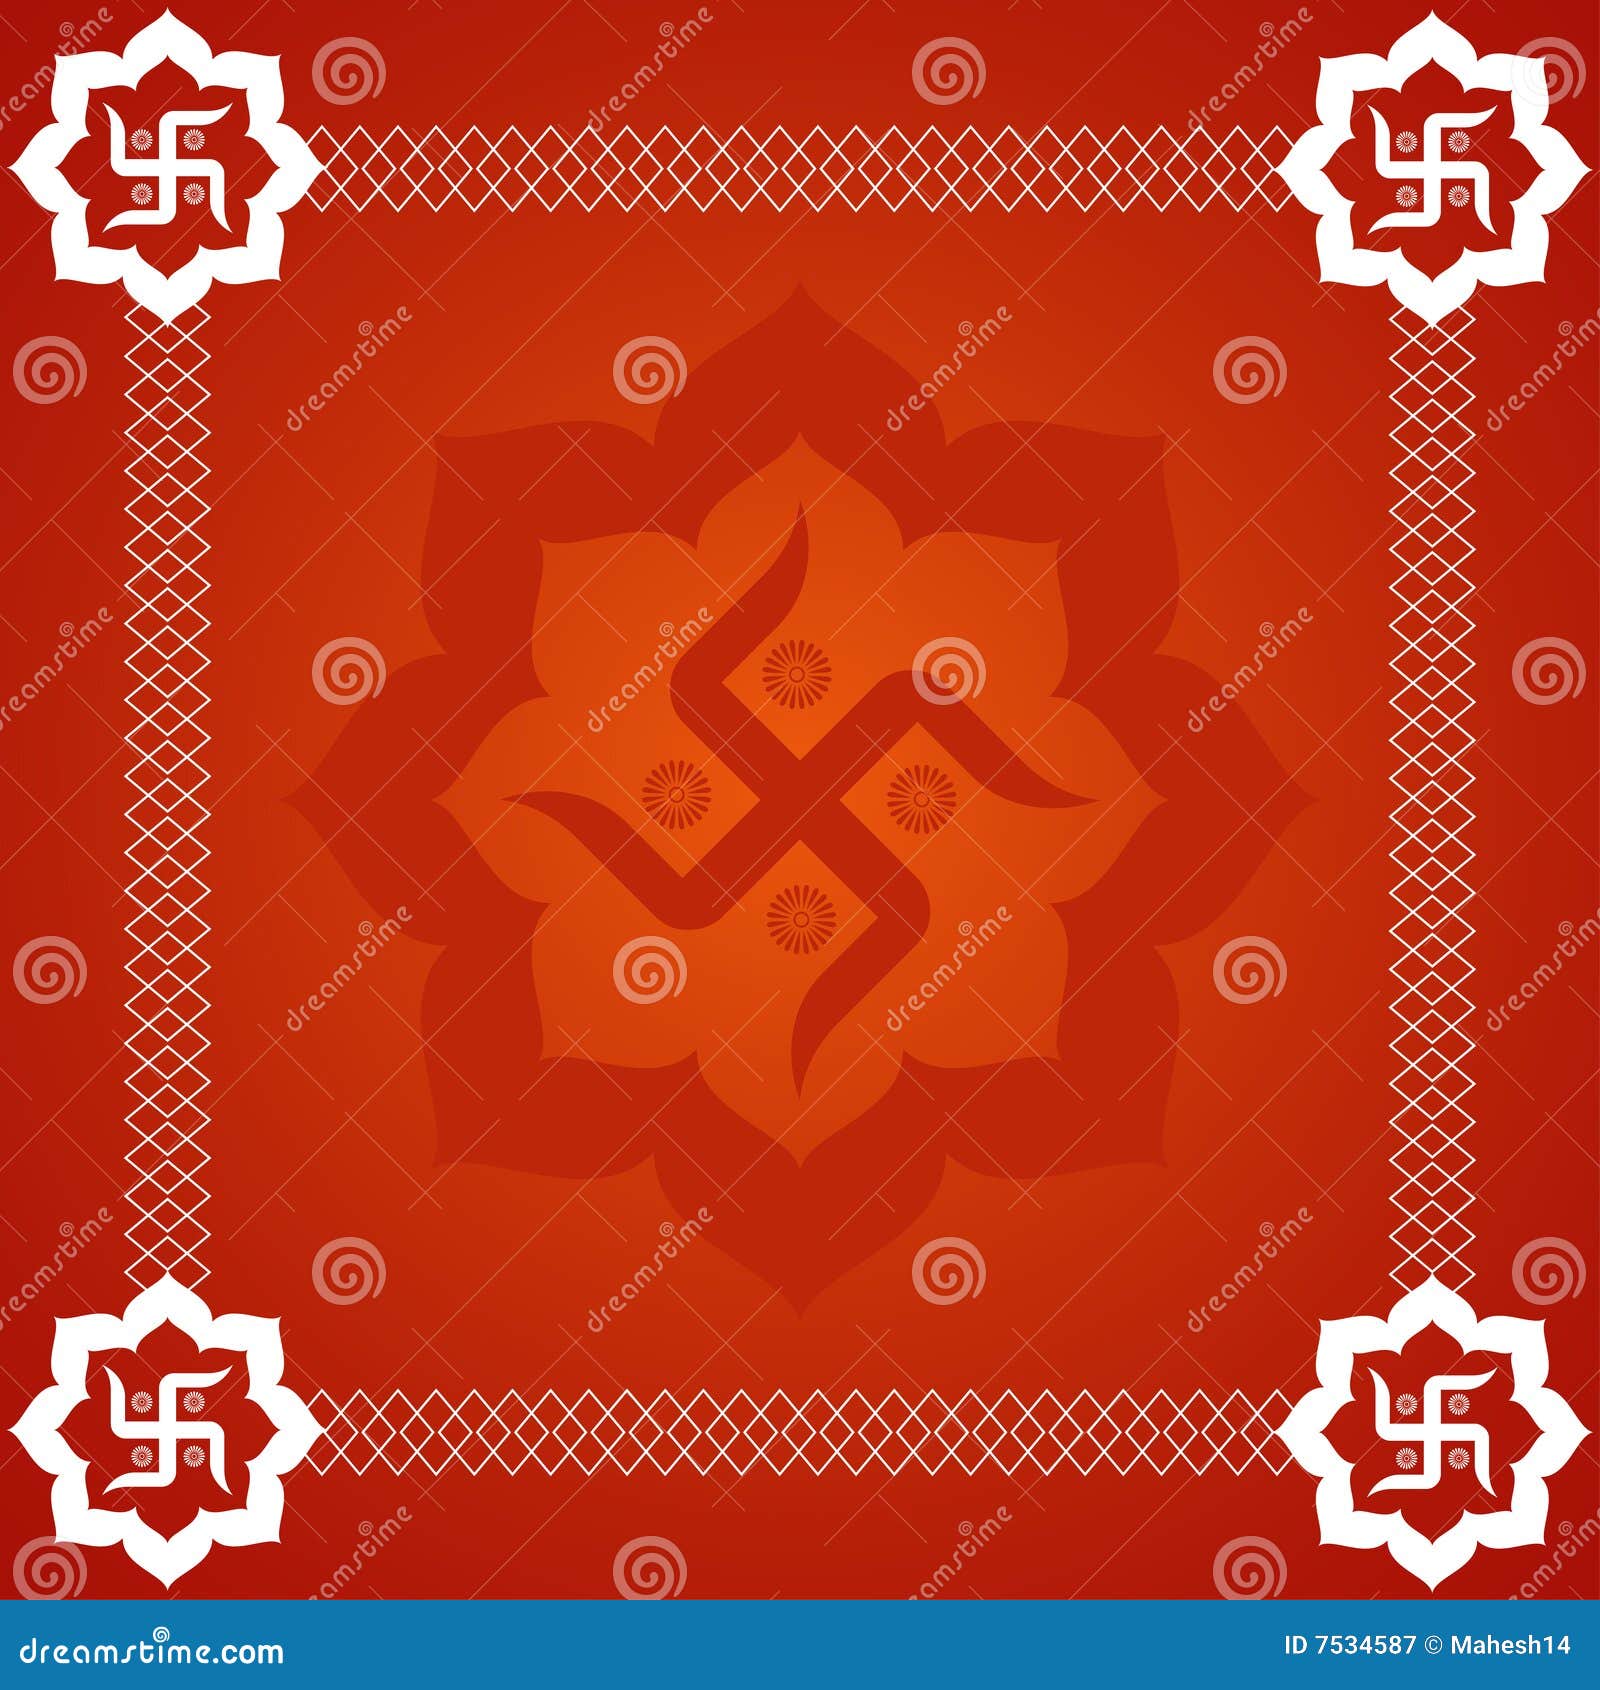 Abstract Swastika Background Royalty Free Stock ...